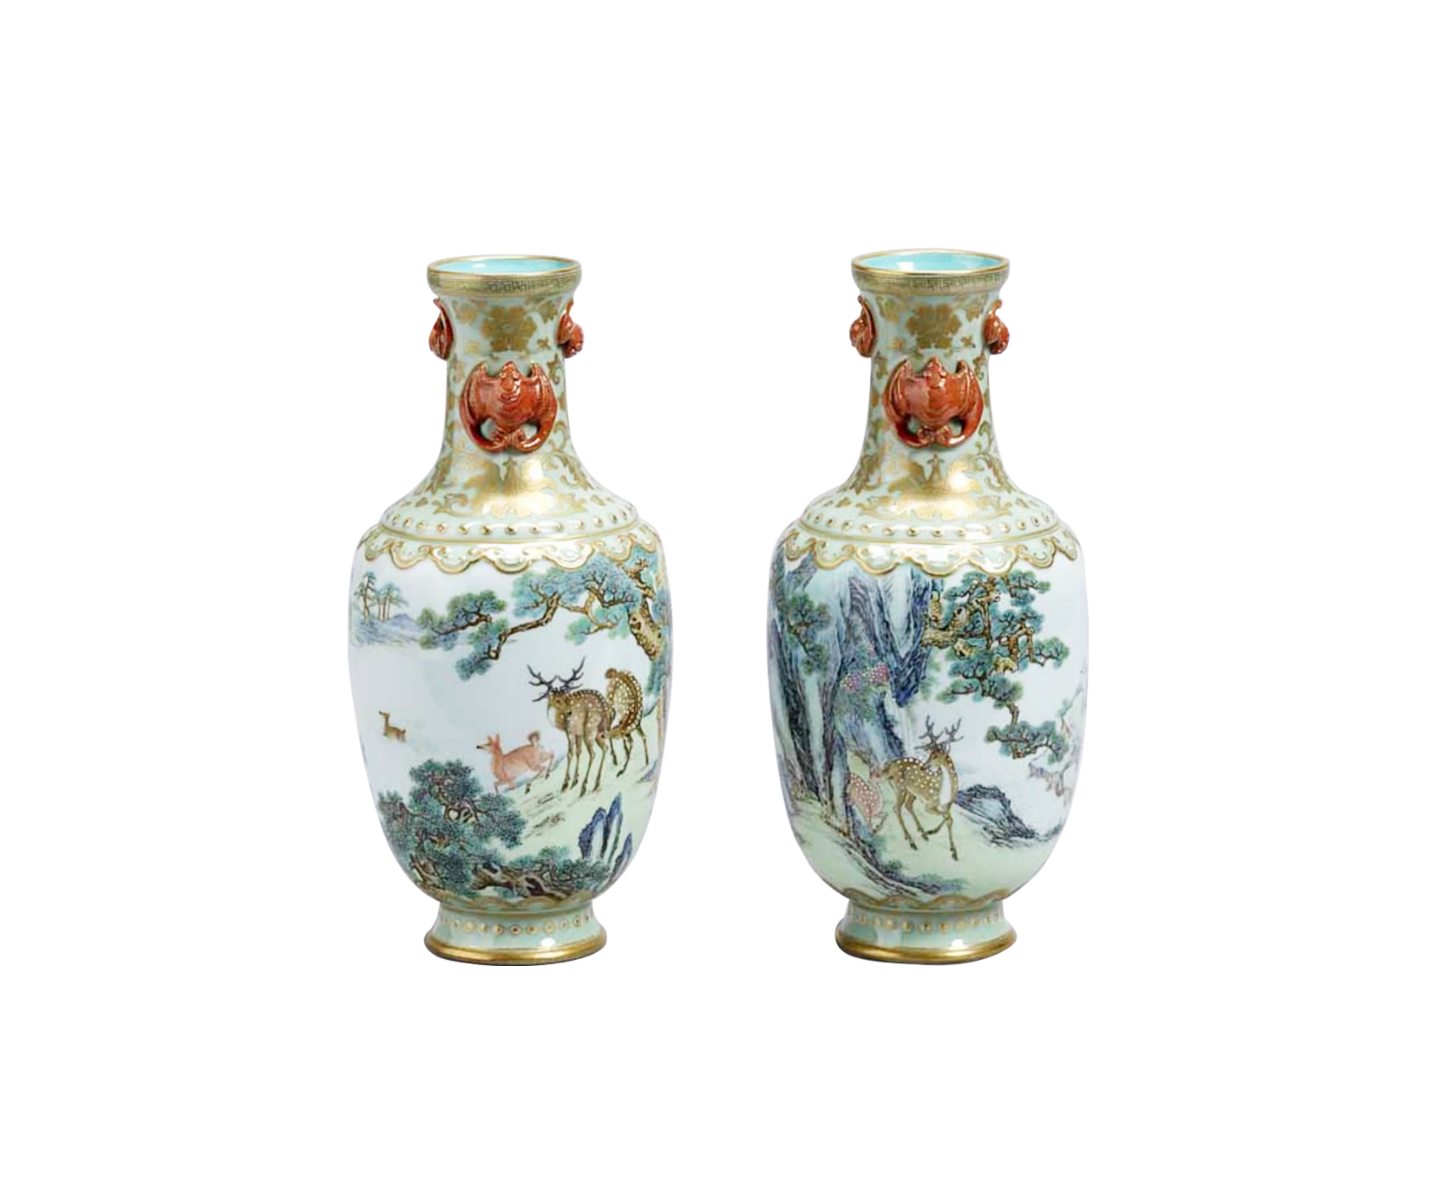 Pair of Vases with Deer and Pine Scenery